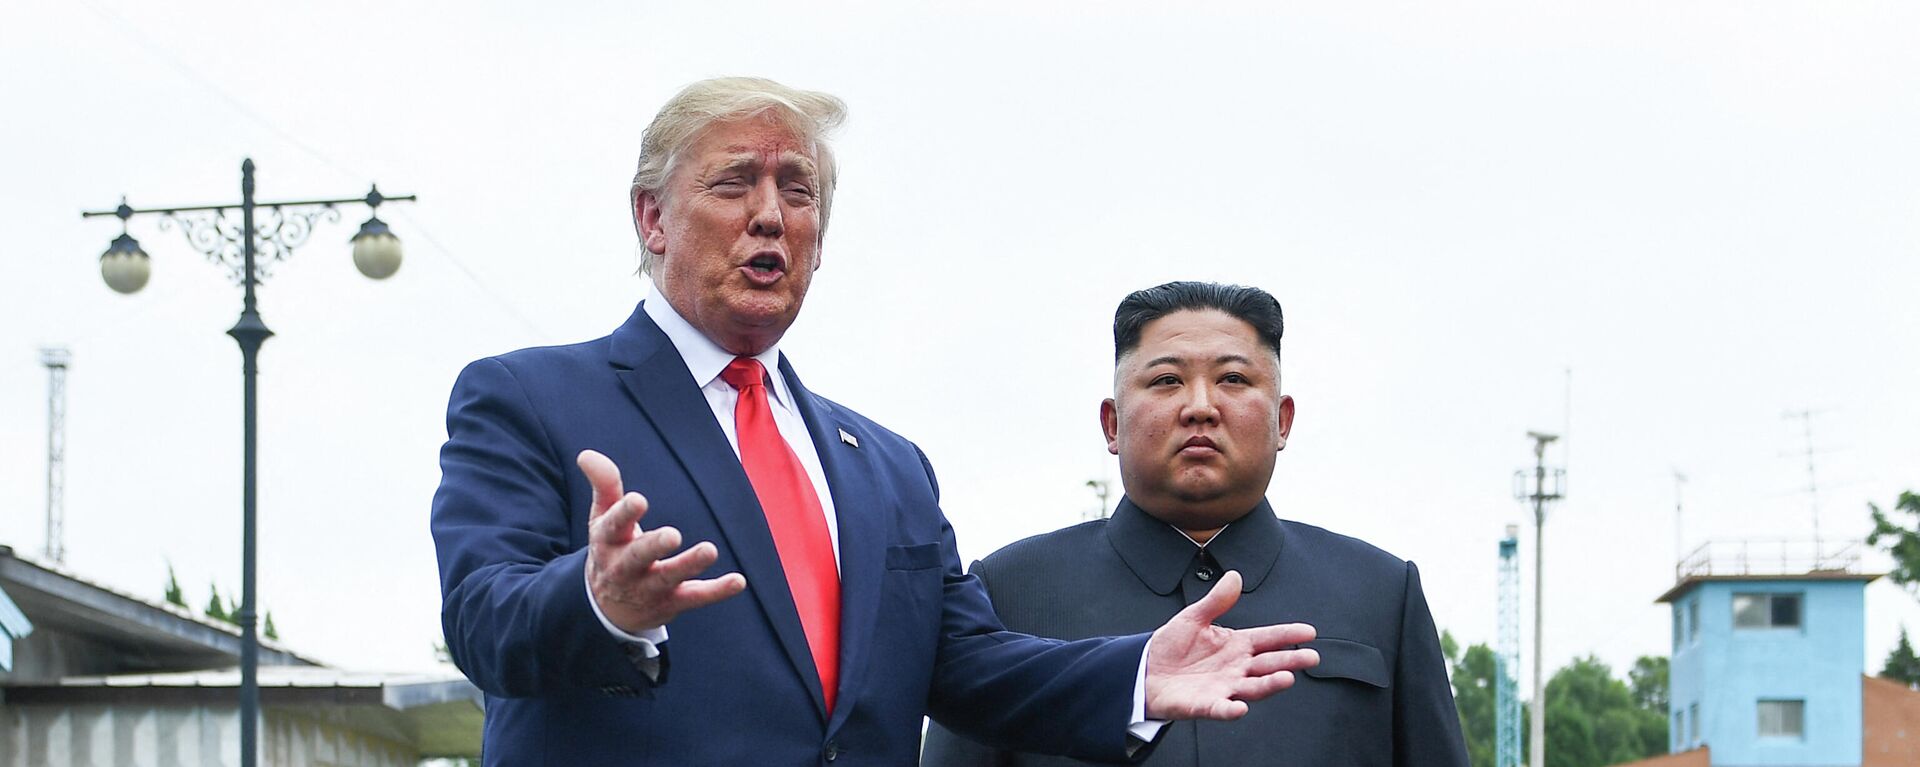 US President Donald Trump speaks as he stands with North Korea's leader Kim Jong Un south of the Military Demarcation Line that divides North and South Korea, in the Joint Security Area (JSA) of Panmunjom in the Demilitarized zone (DMZ) on June 30, 2019 - Sputnik International, 1920, 12.12.2021